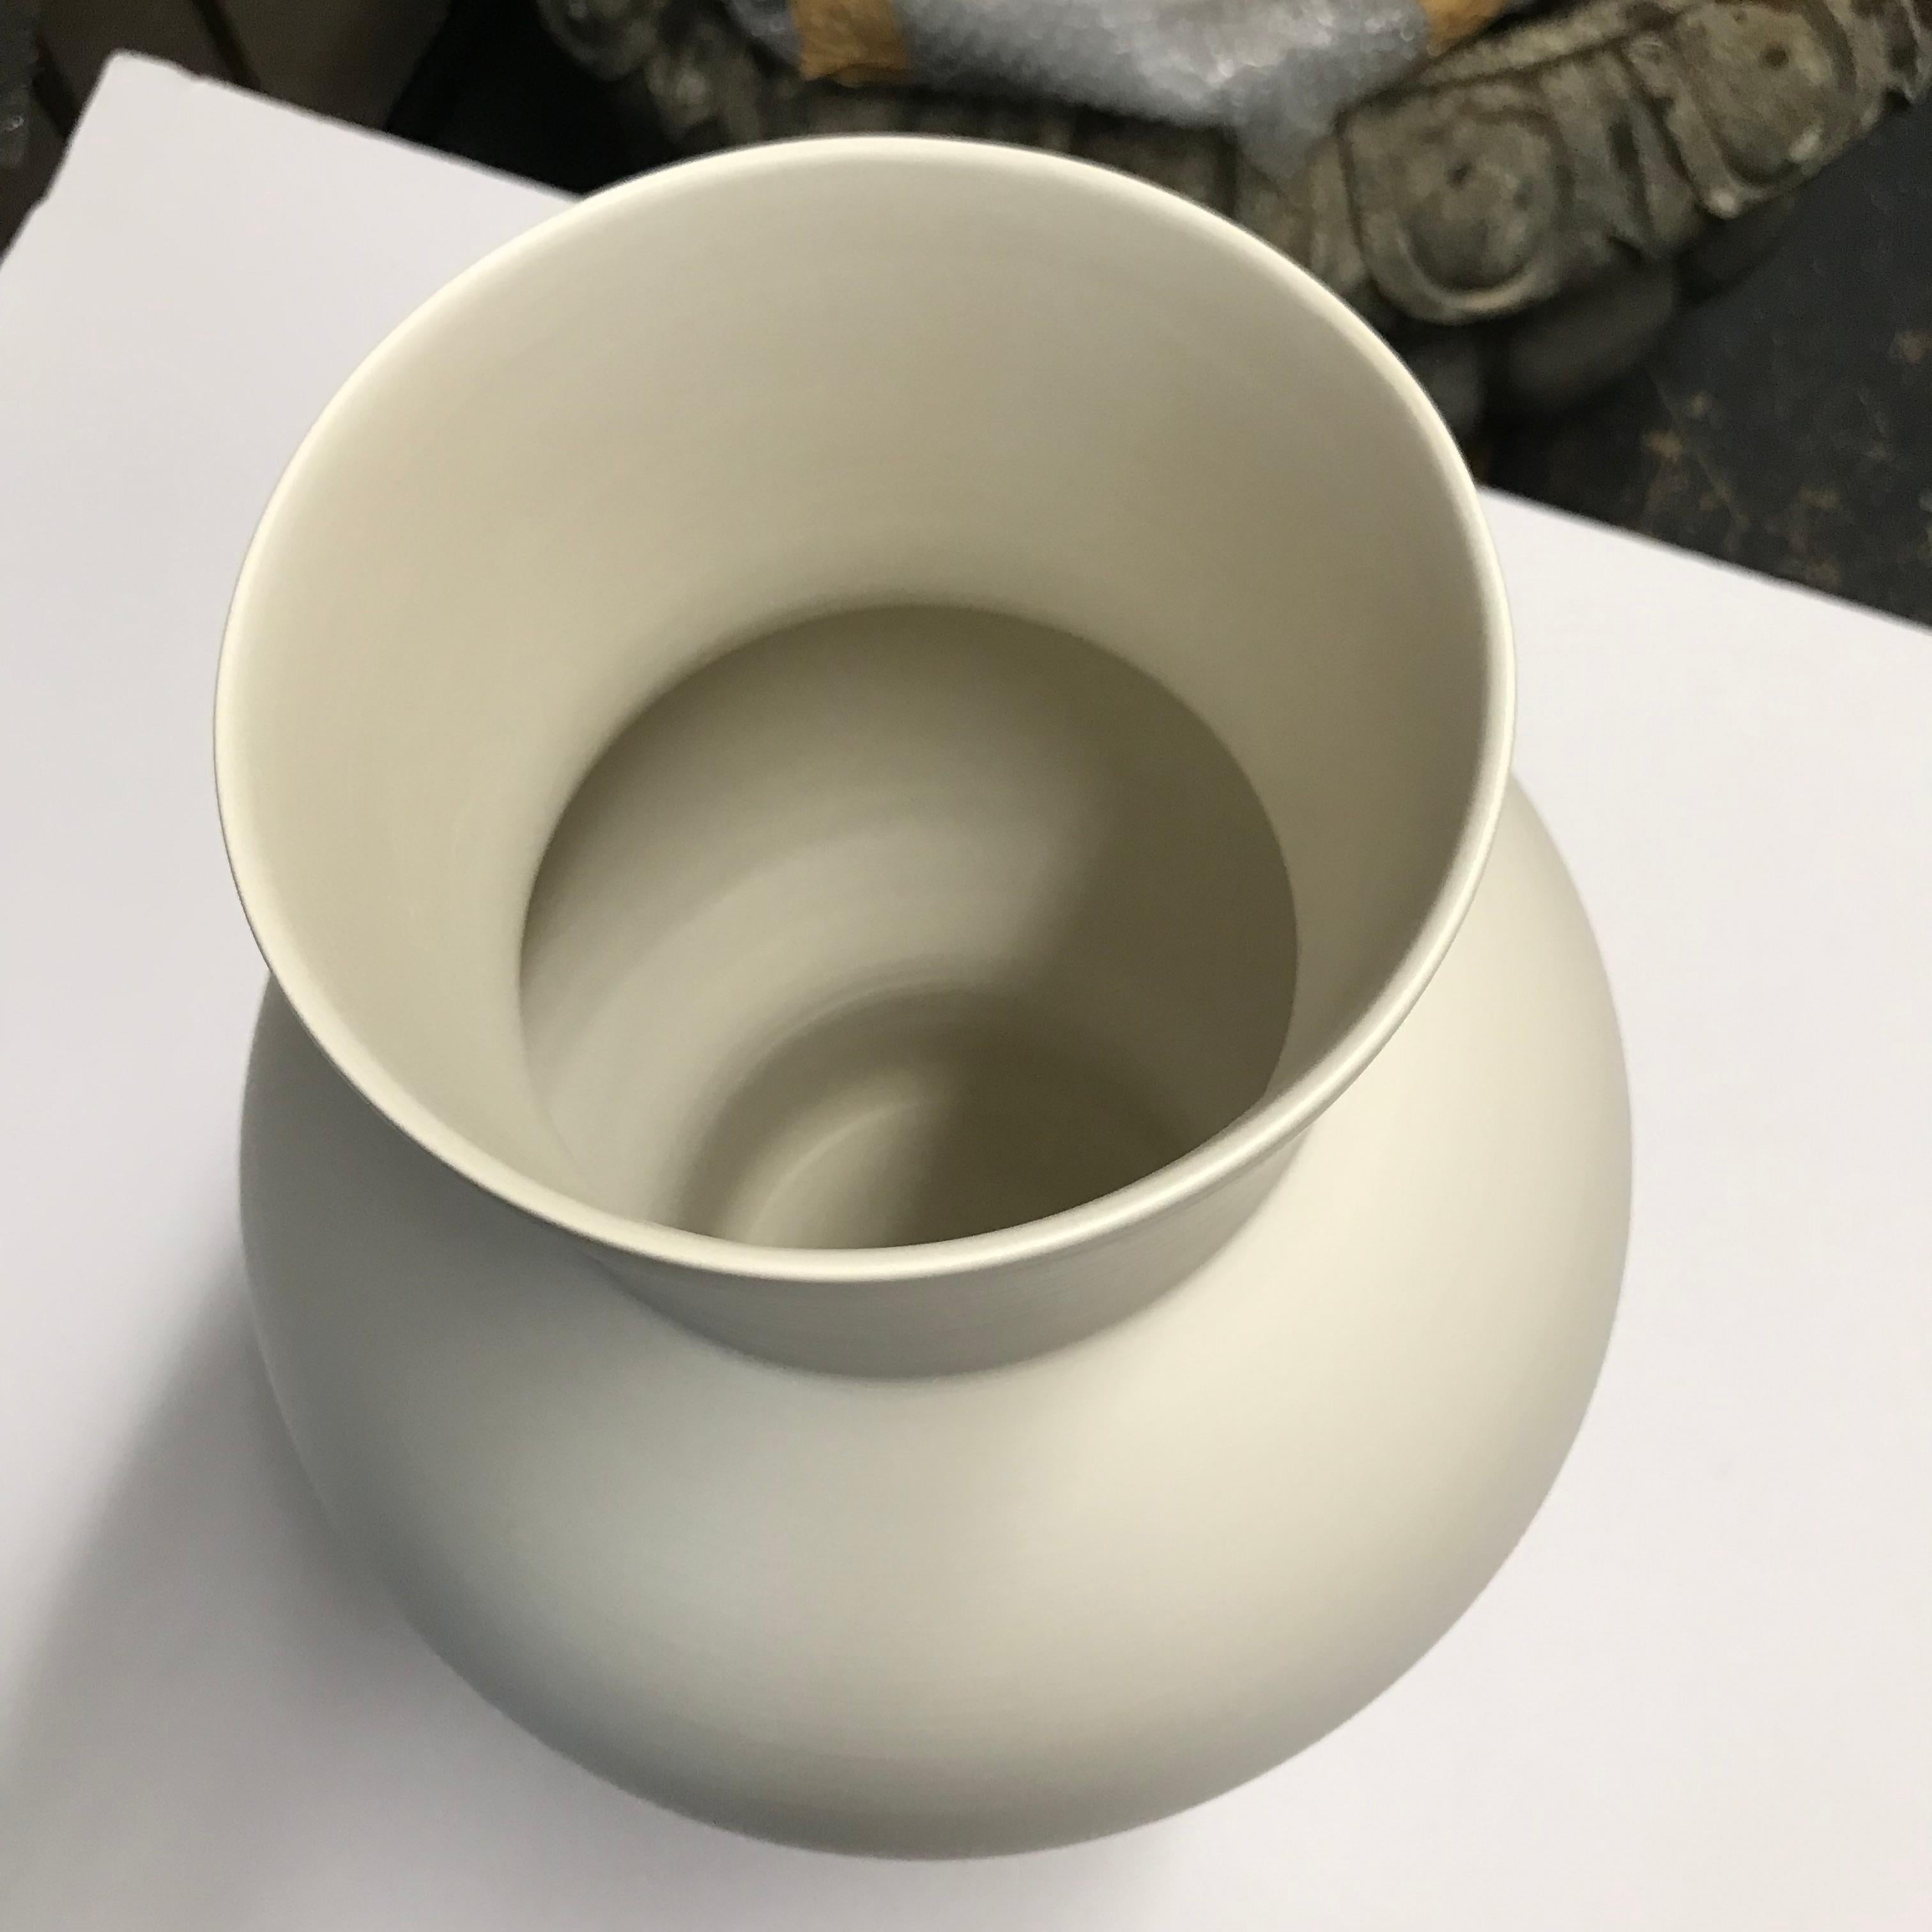 Contemporary Italian large handmade white vase
Bulbous centre with a wide neck
handmade
Matte finish / fine ceramic
The same shape is available in linen medium, S5054, see image #4.